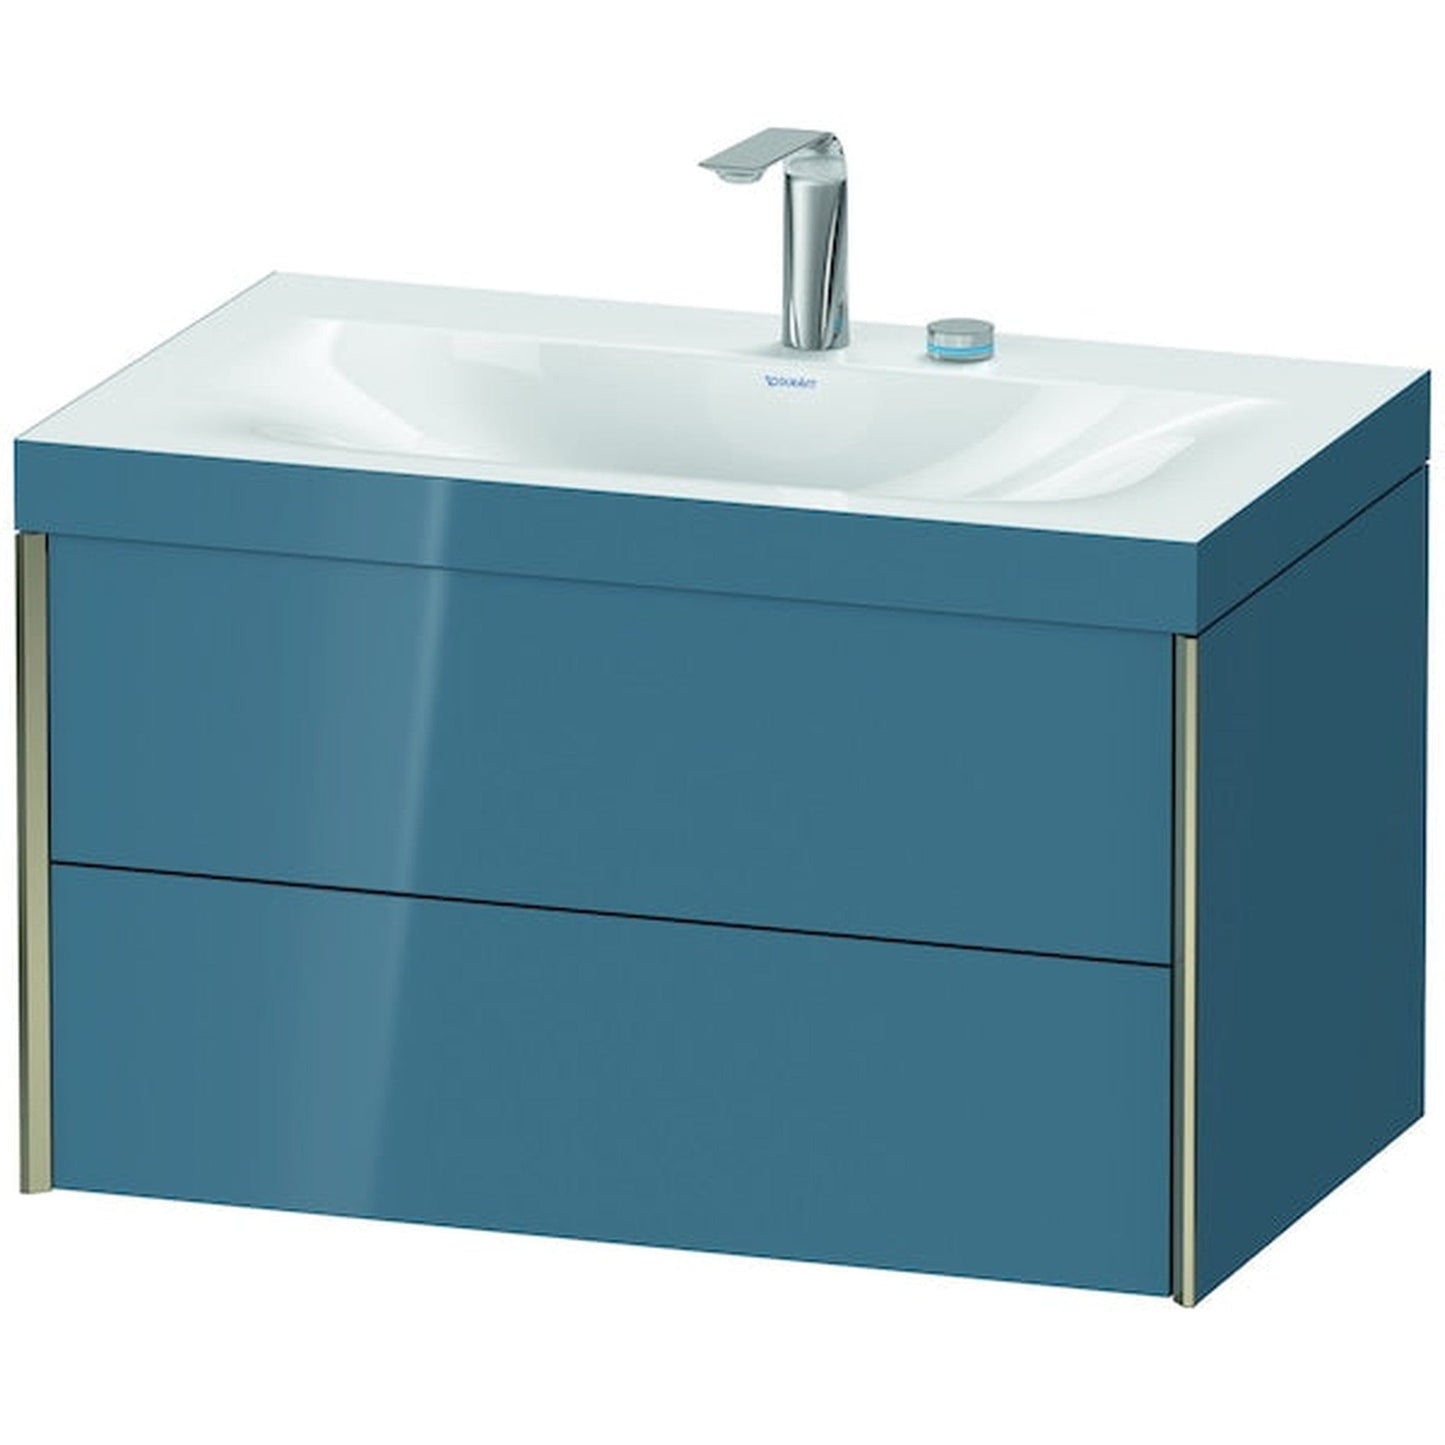 Duravit Xviu 31" x 20" x 19" Two Drawer C-Bonded Wall-Mount Vanity Kit With Two Tap Holes, Stone Blue (XV4615EB147C)